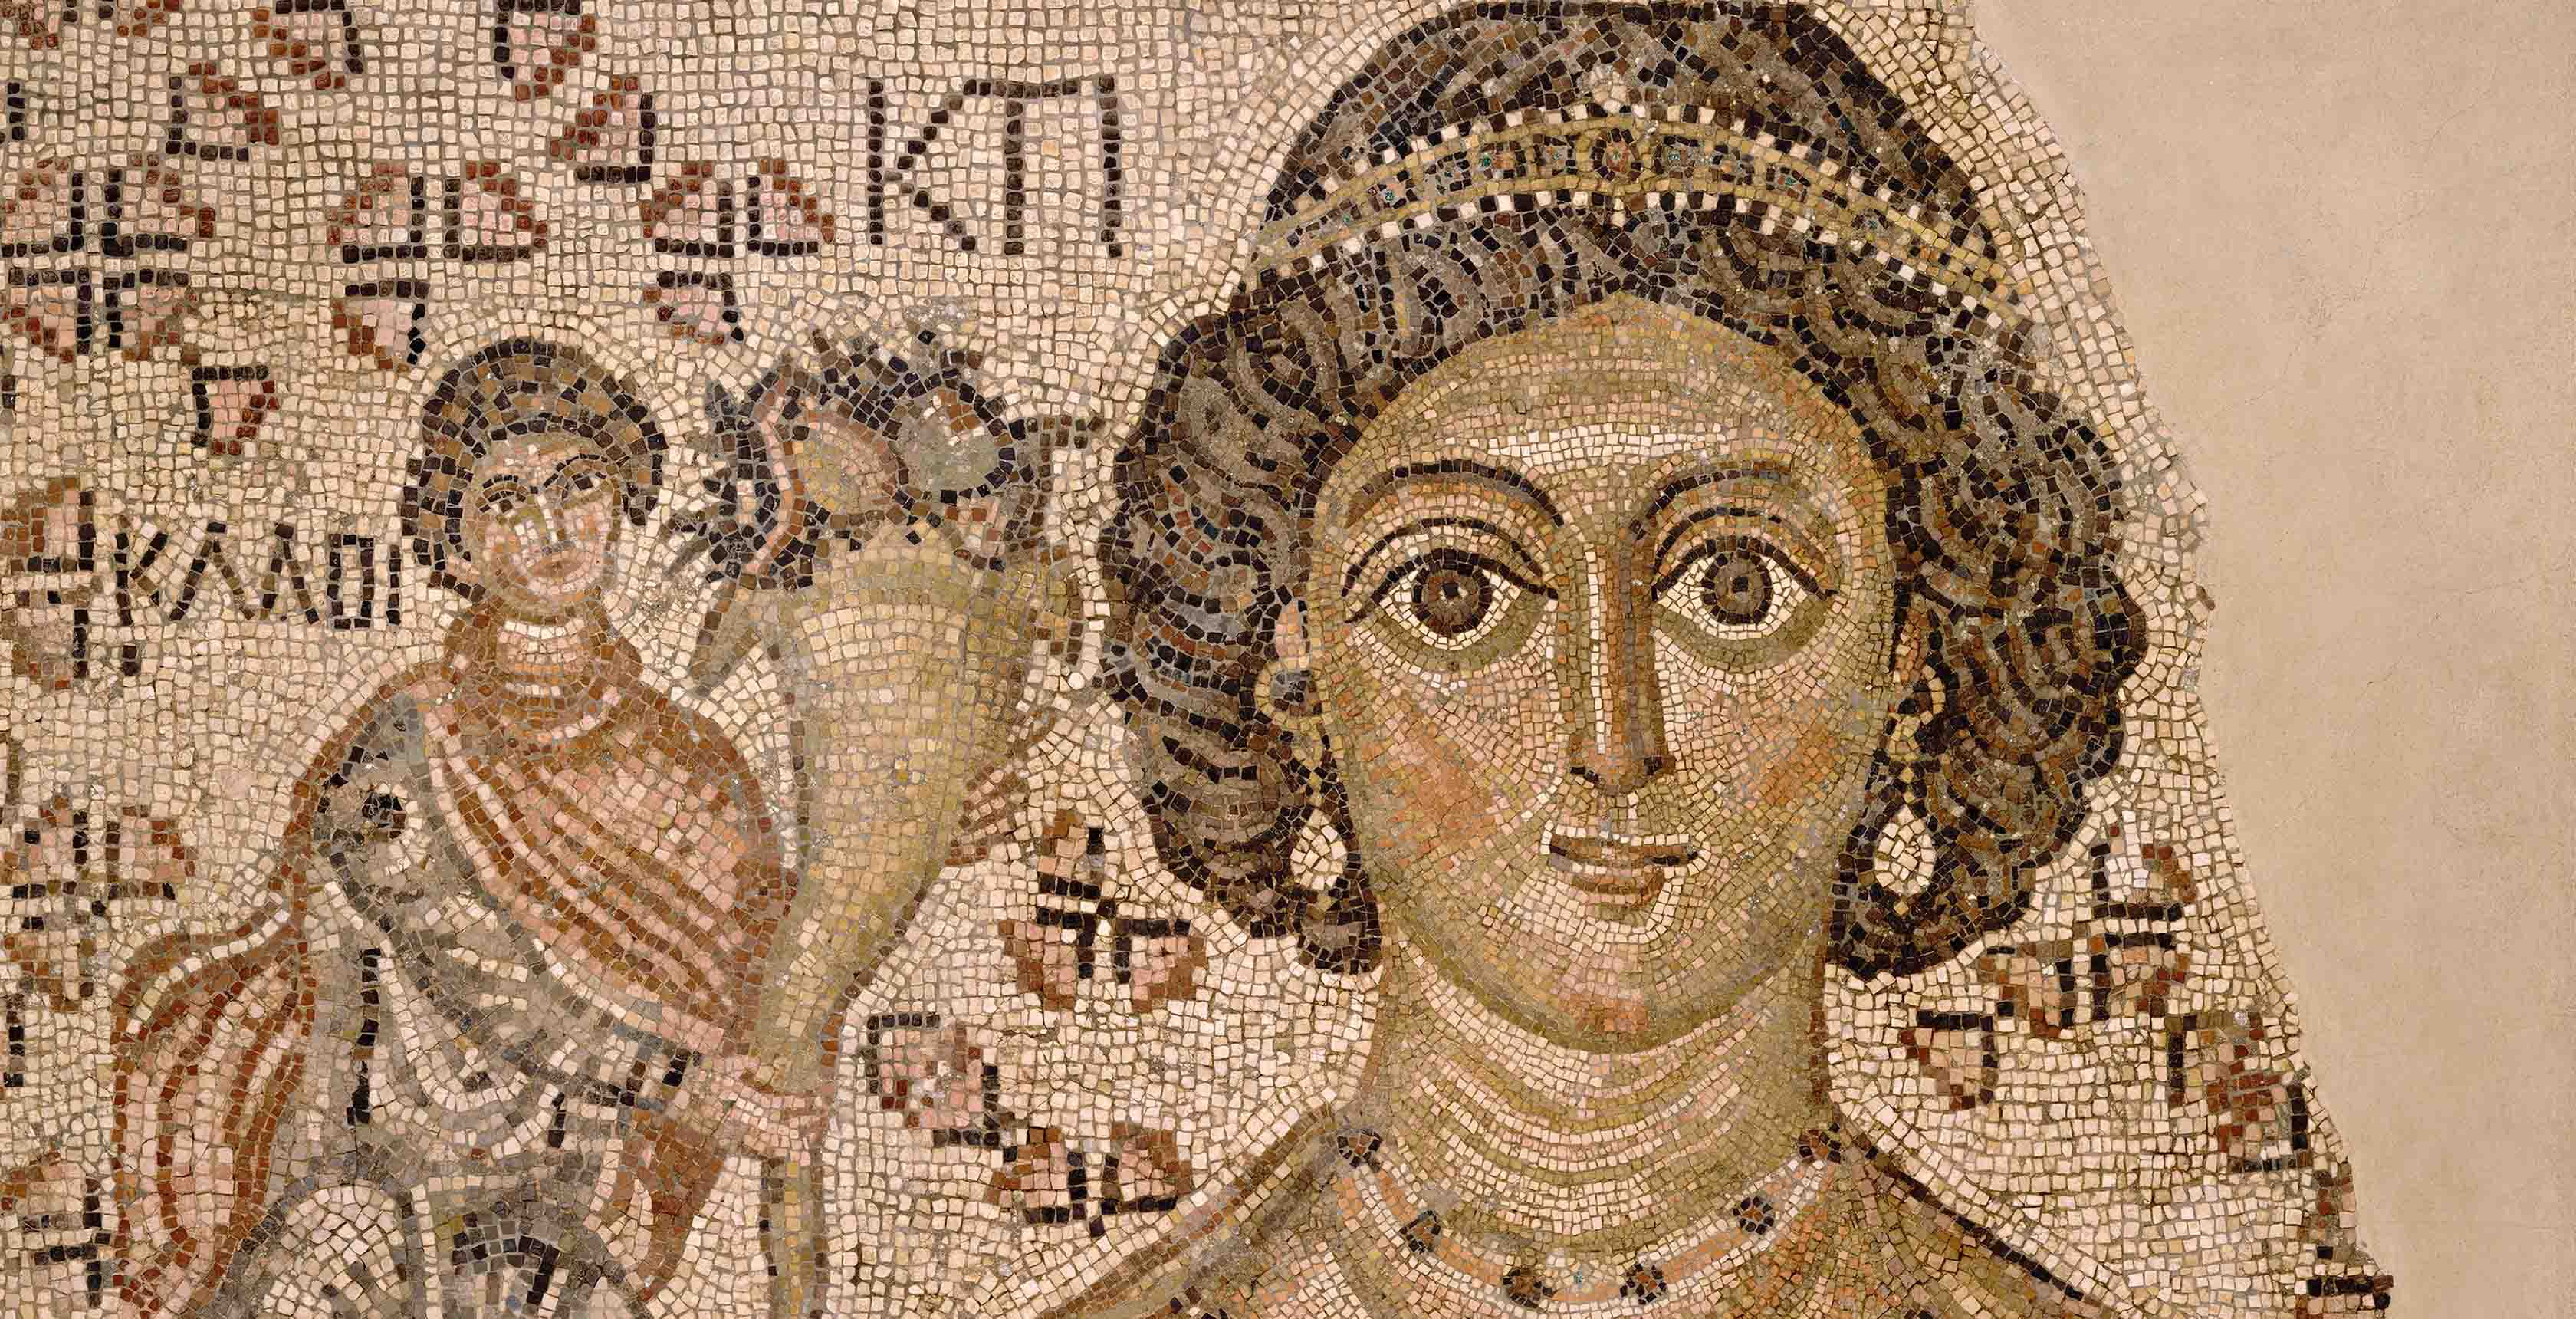 Brown and beige fragment of a floor mosaic with a brown-skinned woman with curly brown hair, a headpiece, and earrings at center, and a man smaller in scale presenting her flowers to her left